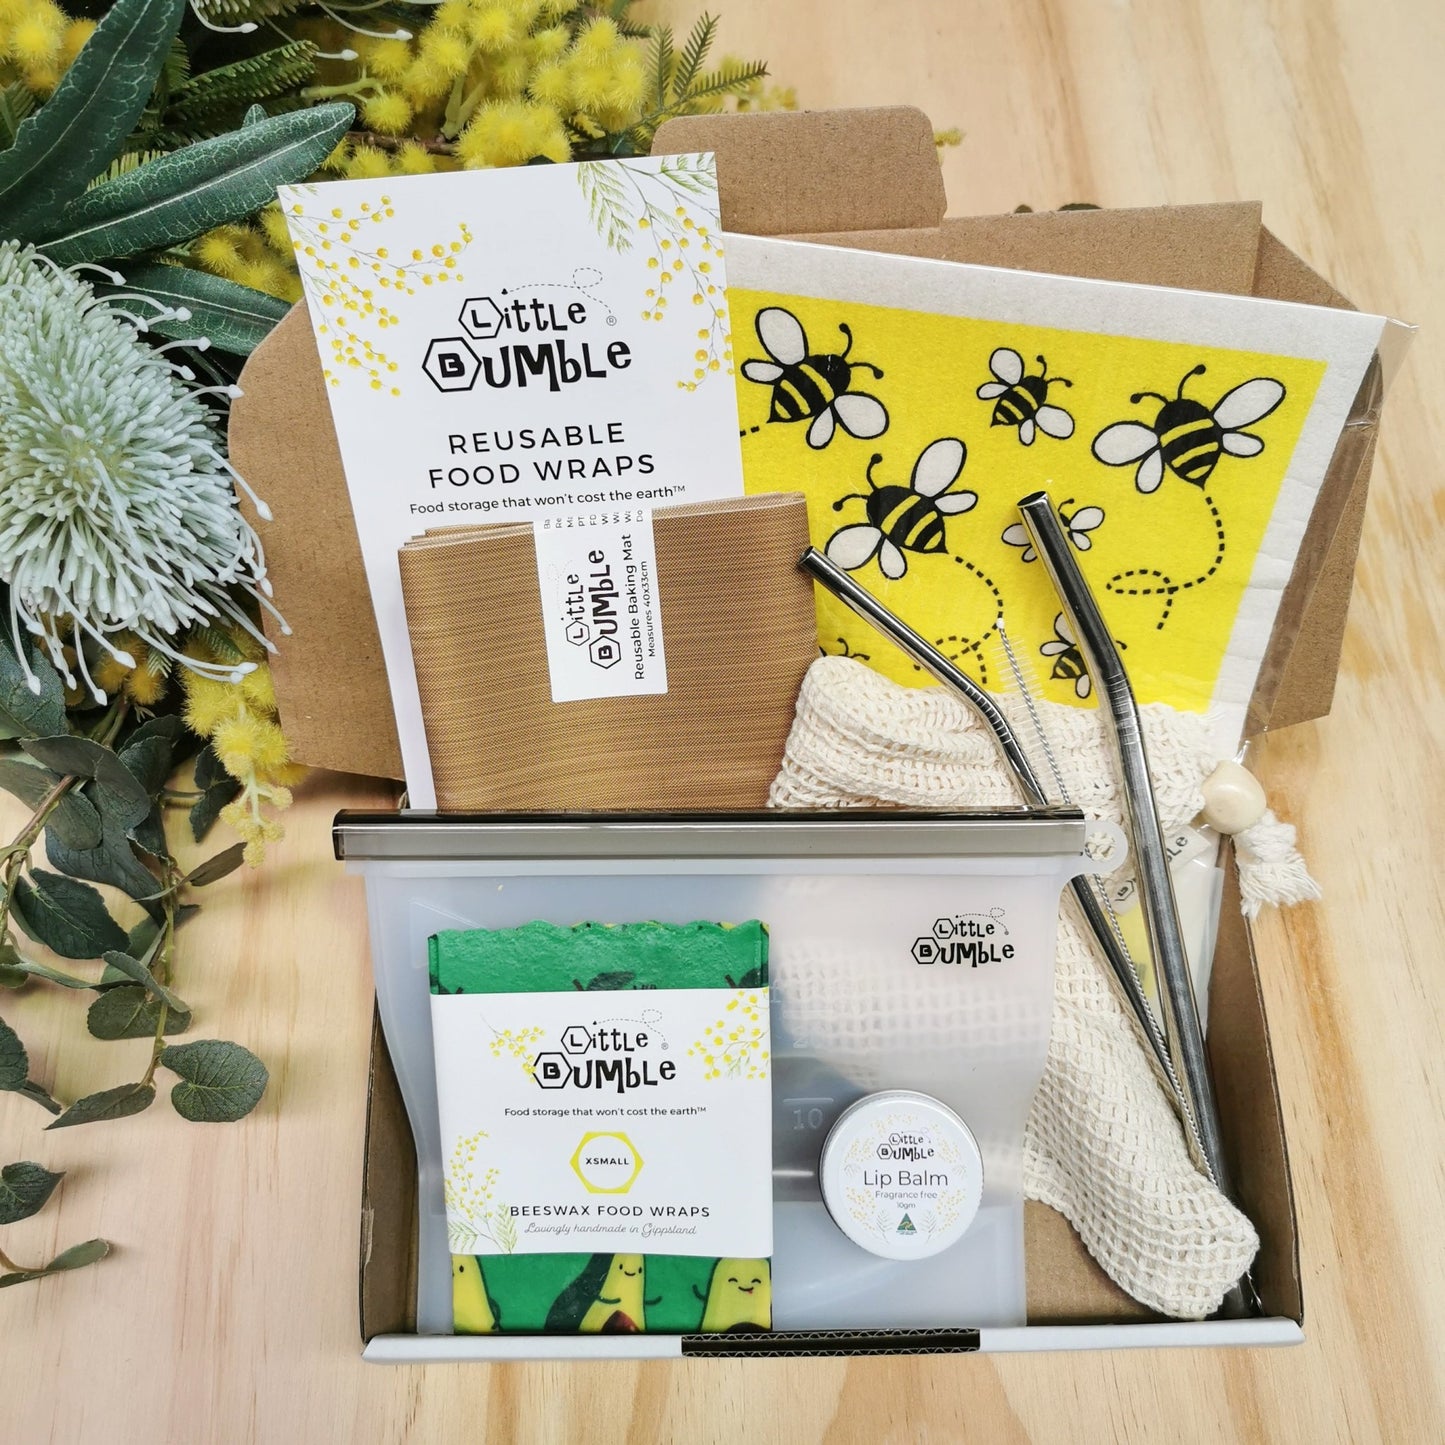 Christmas gift box- only $40 - Little Bumble Reusable Food Wraps